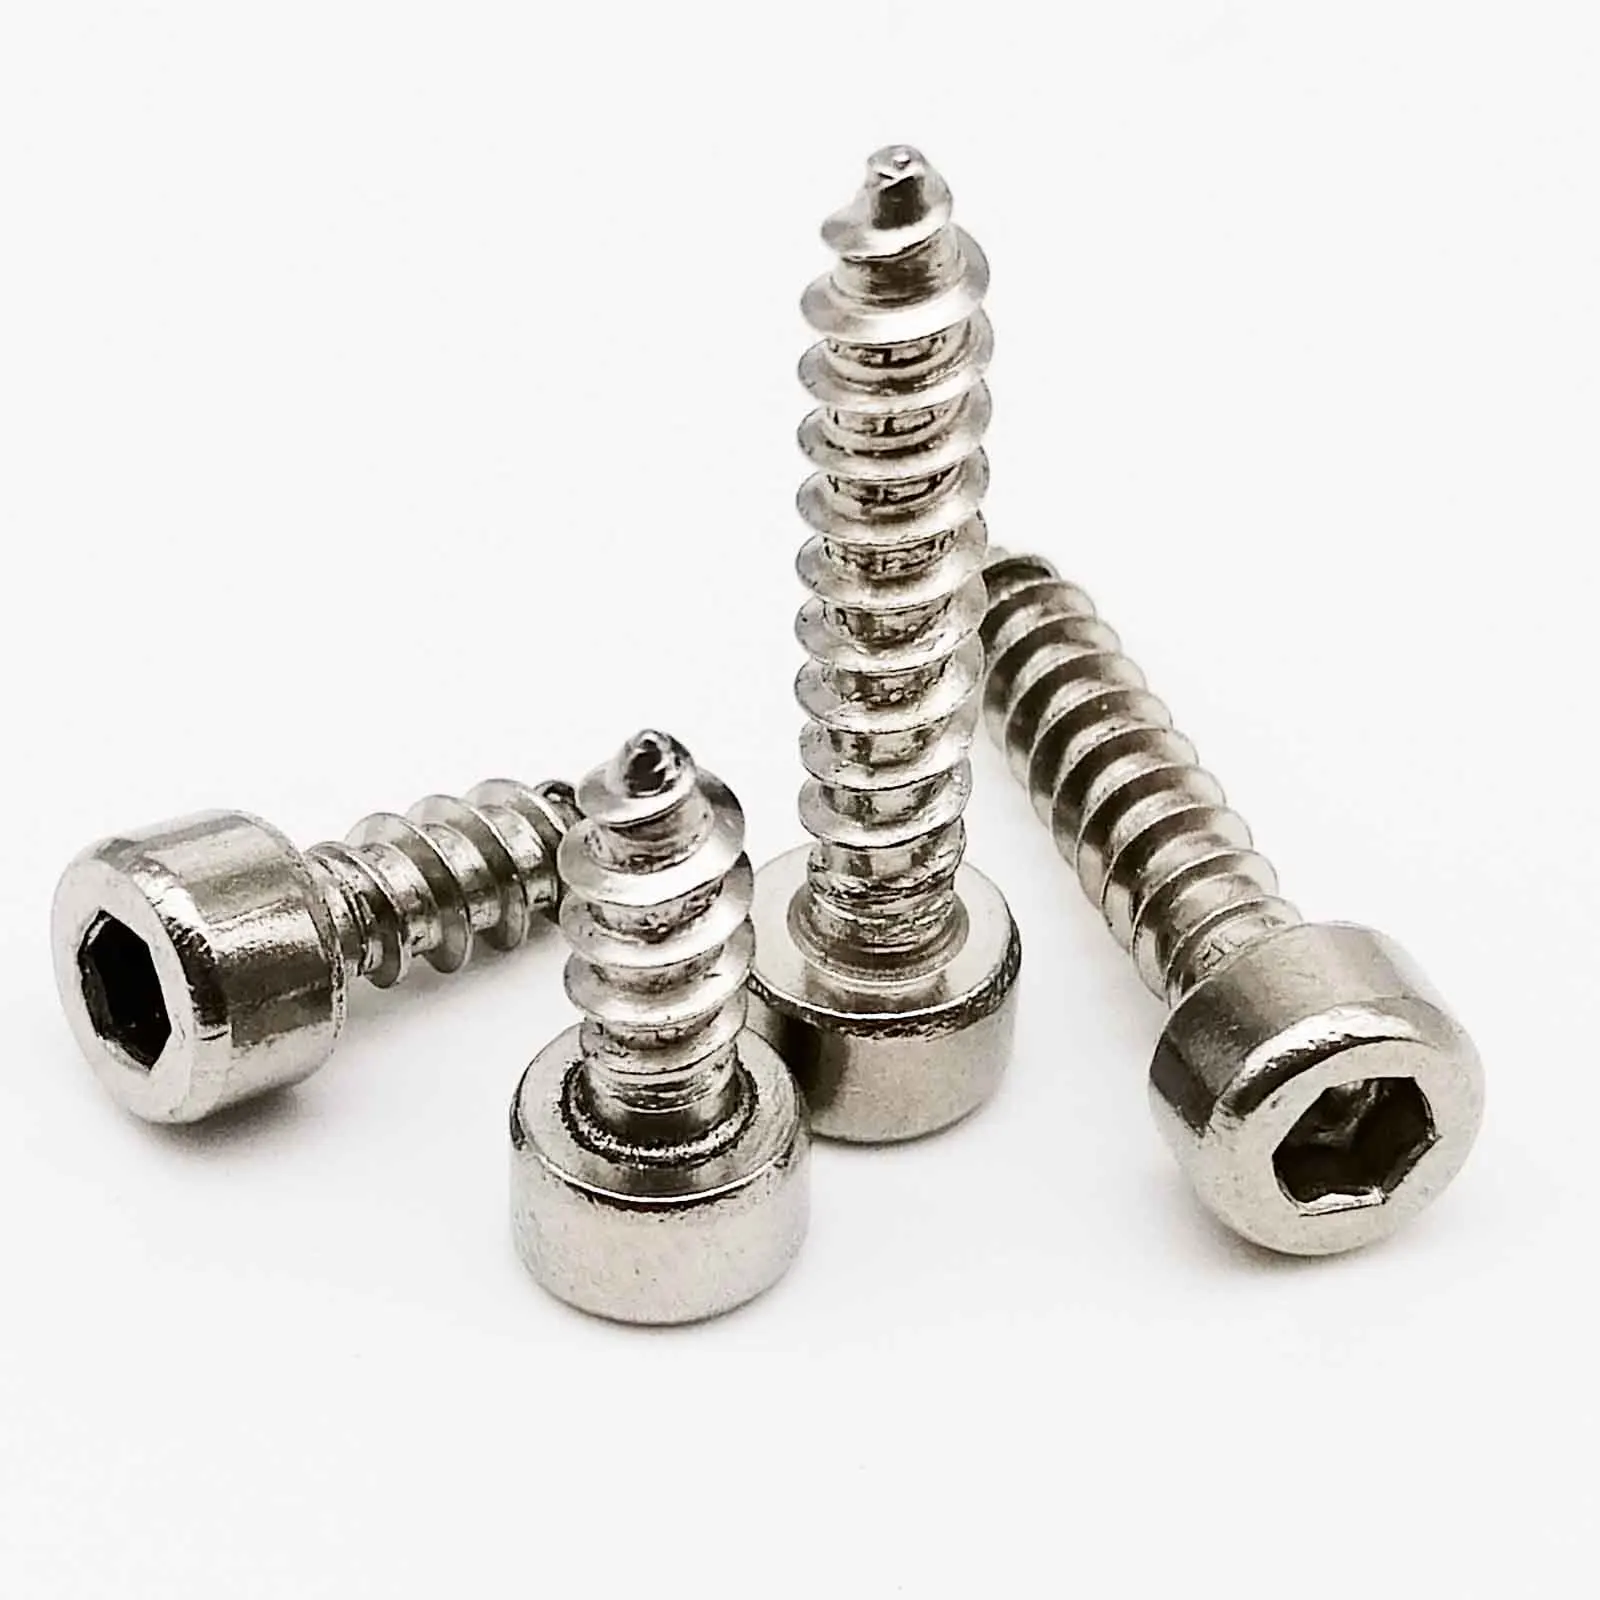 M2 M3 M4 M5 M6 Hex Socket Cap Screw Self Tapping Allen Key Bolt A2 304 Stainless